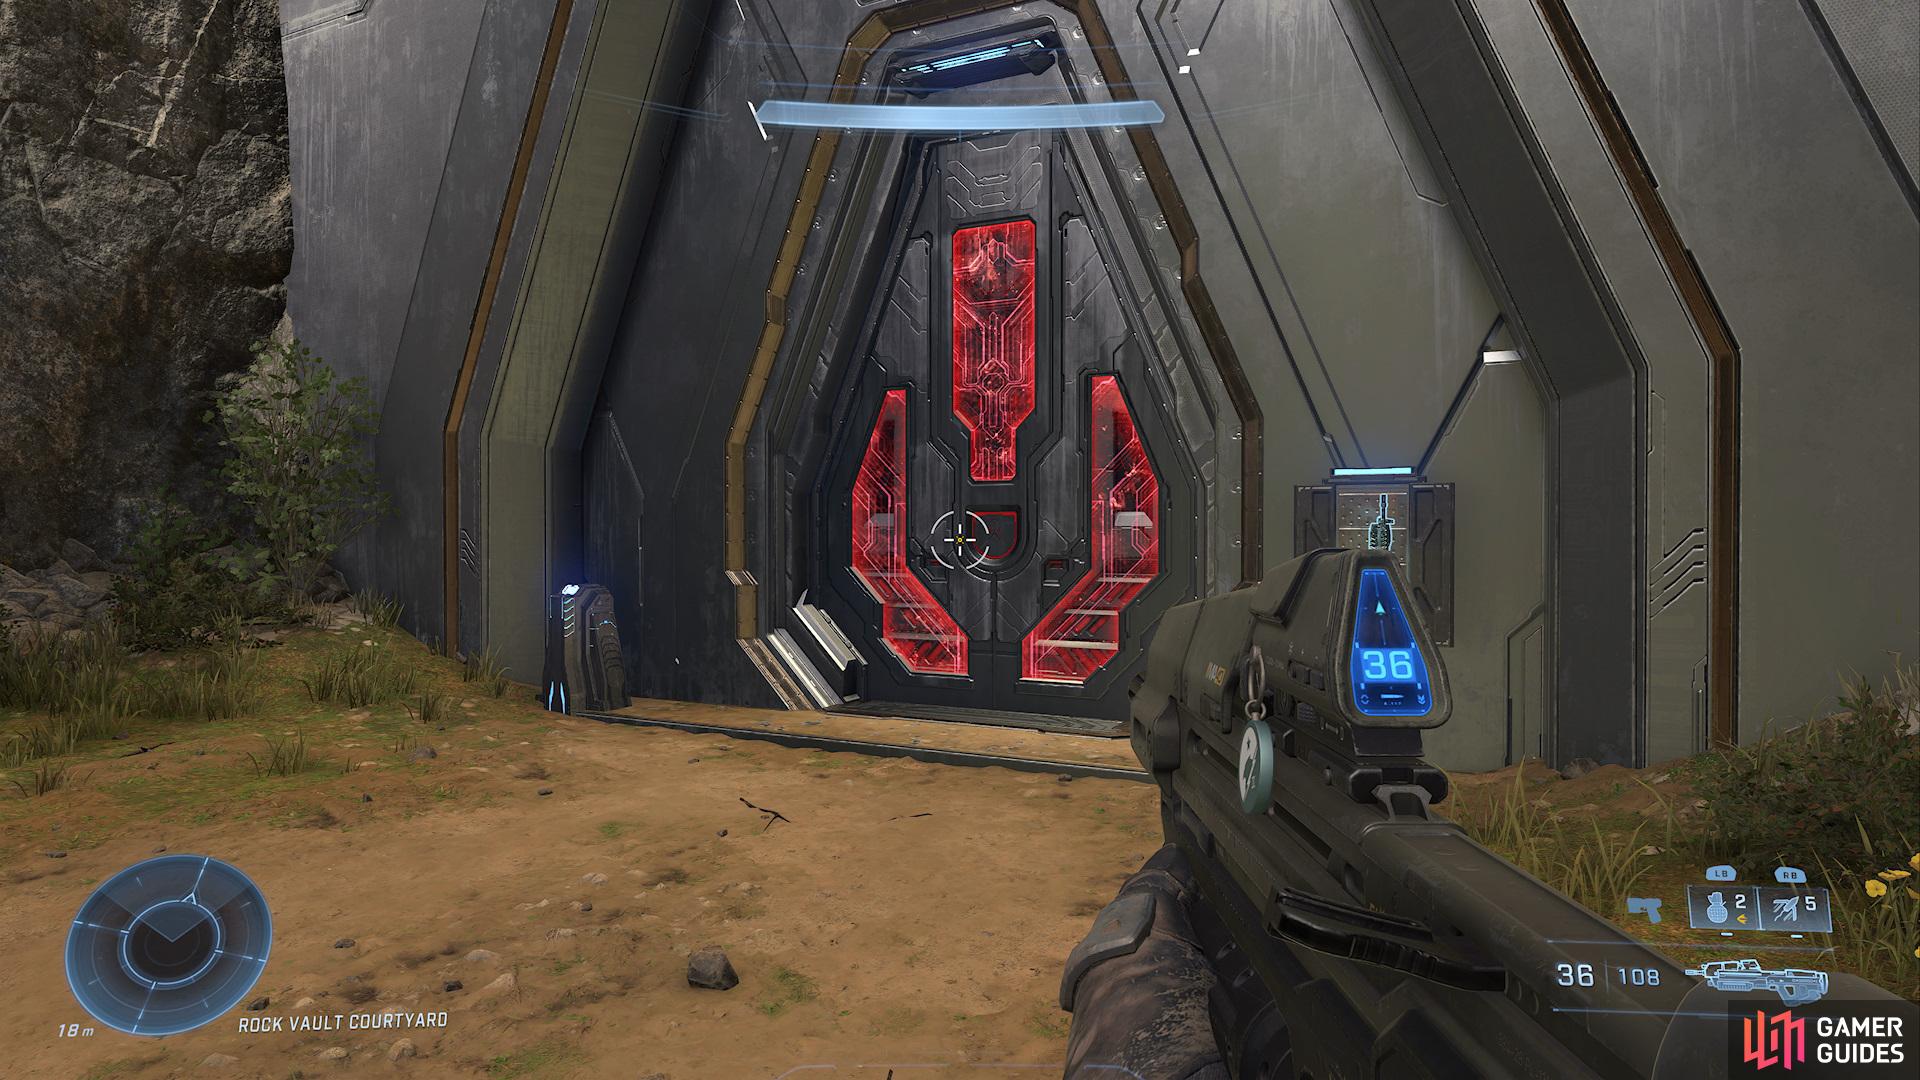 The Hidden Vault can be found at east and west sides of the map.